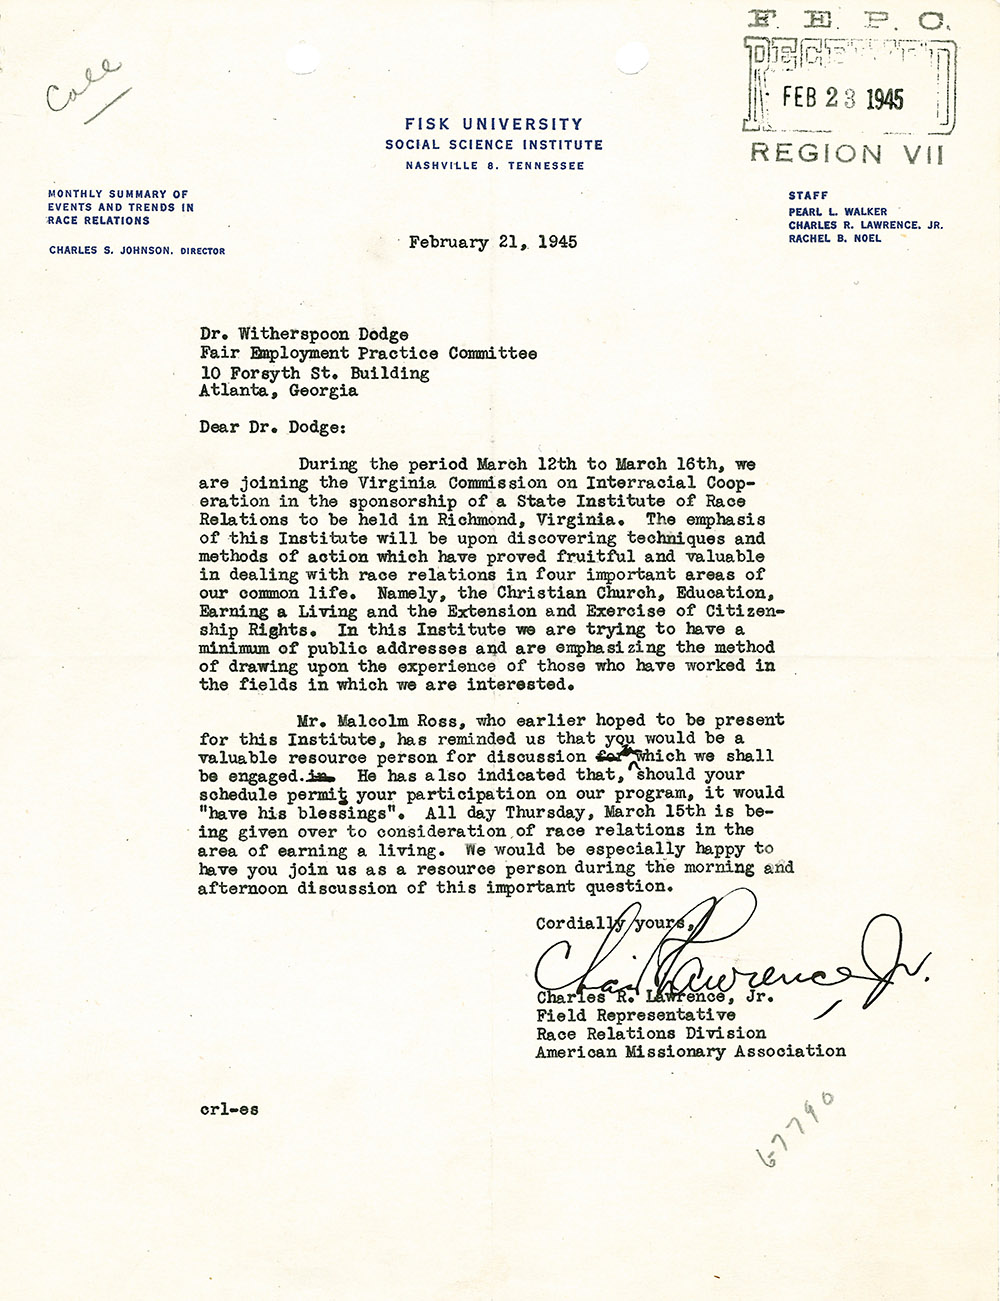 Letter Concerning Race Relations Institute